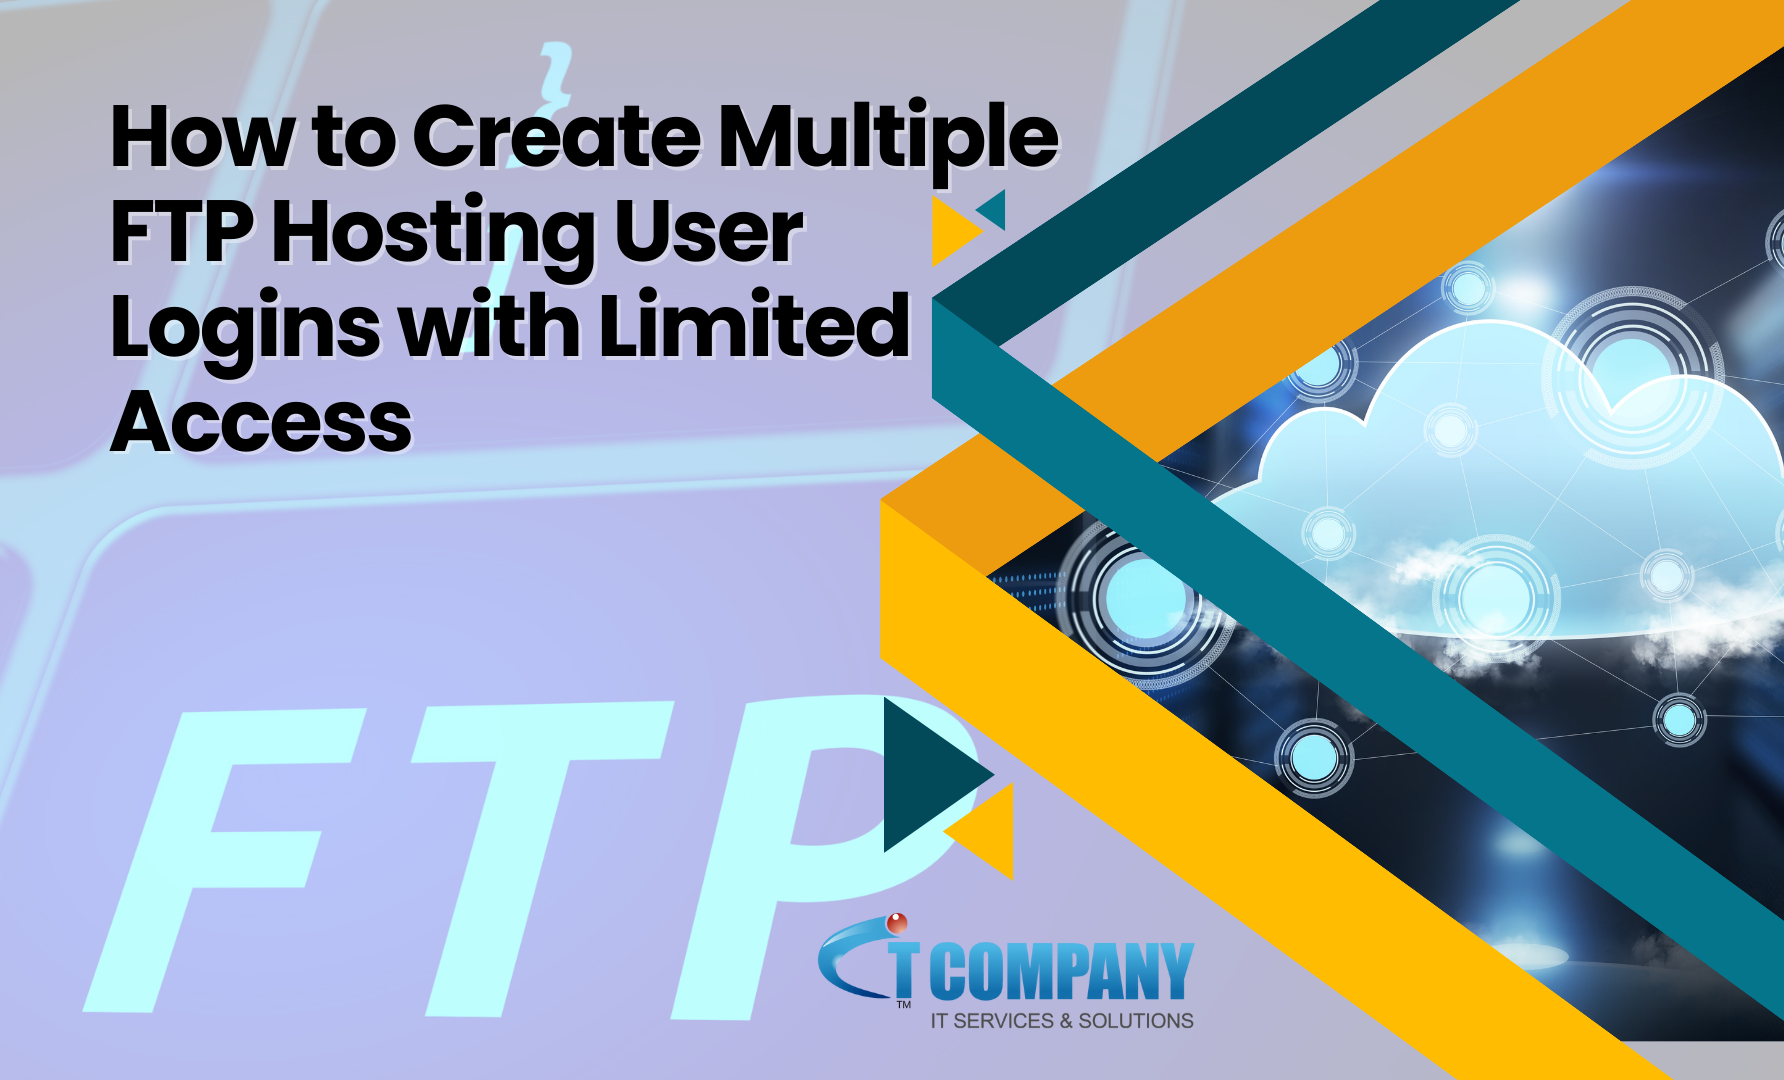 How to Create Multiple FTP Hosting User Logins with Limited Access